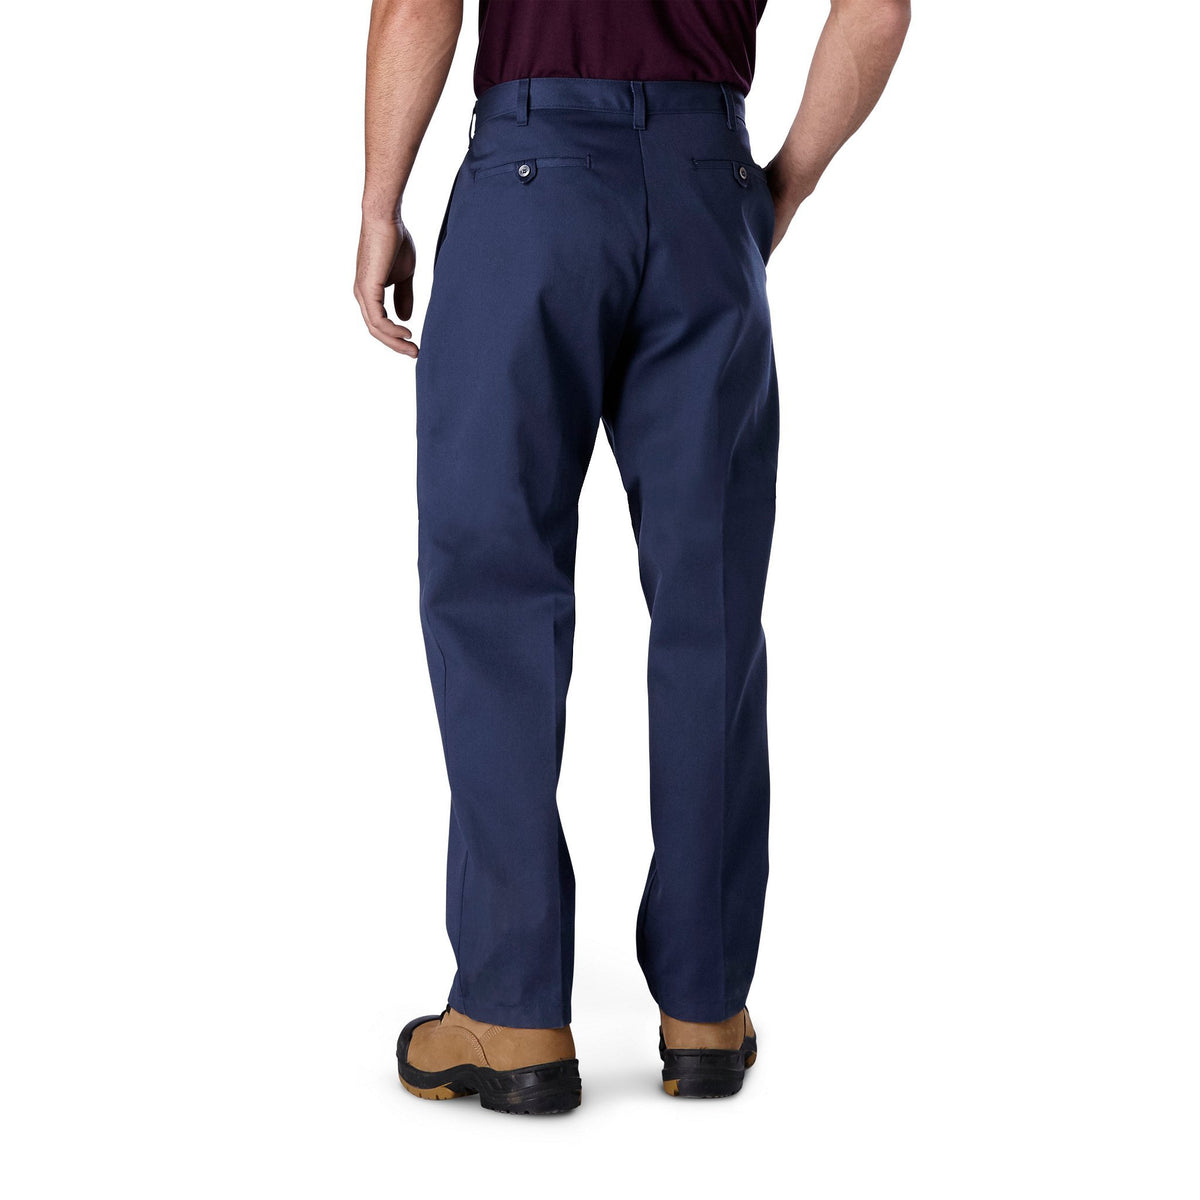 Men's Flat Front Work Pants in Cotton Blend Stain Resistant Finish | Mark's